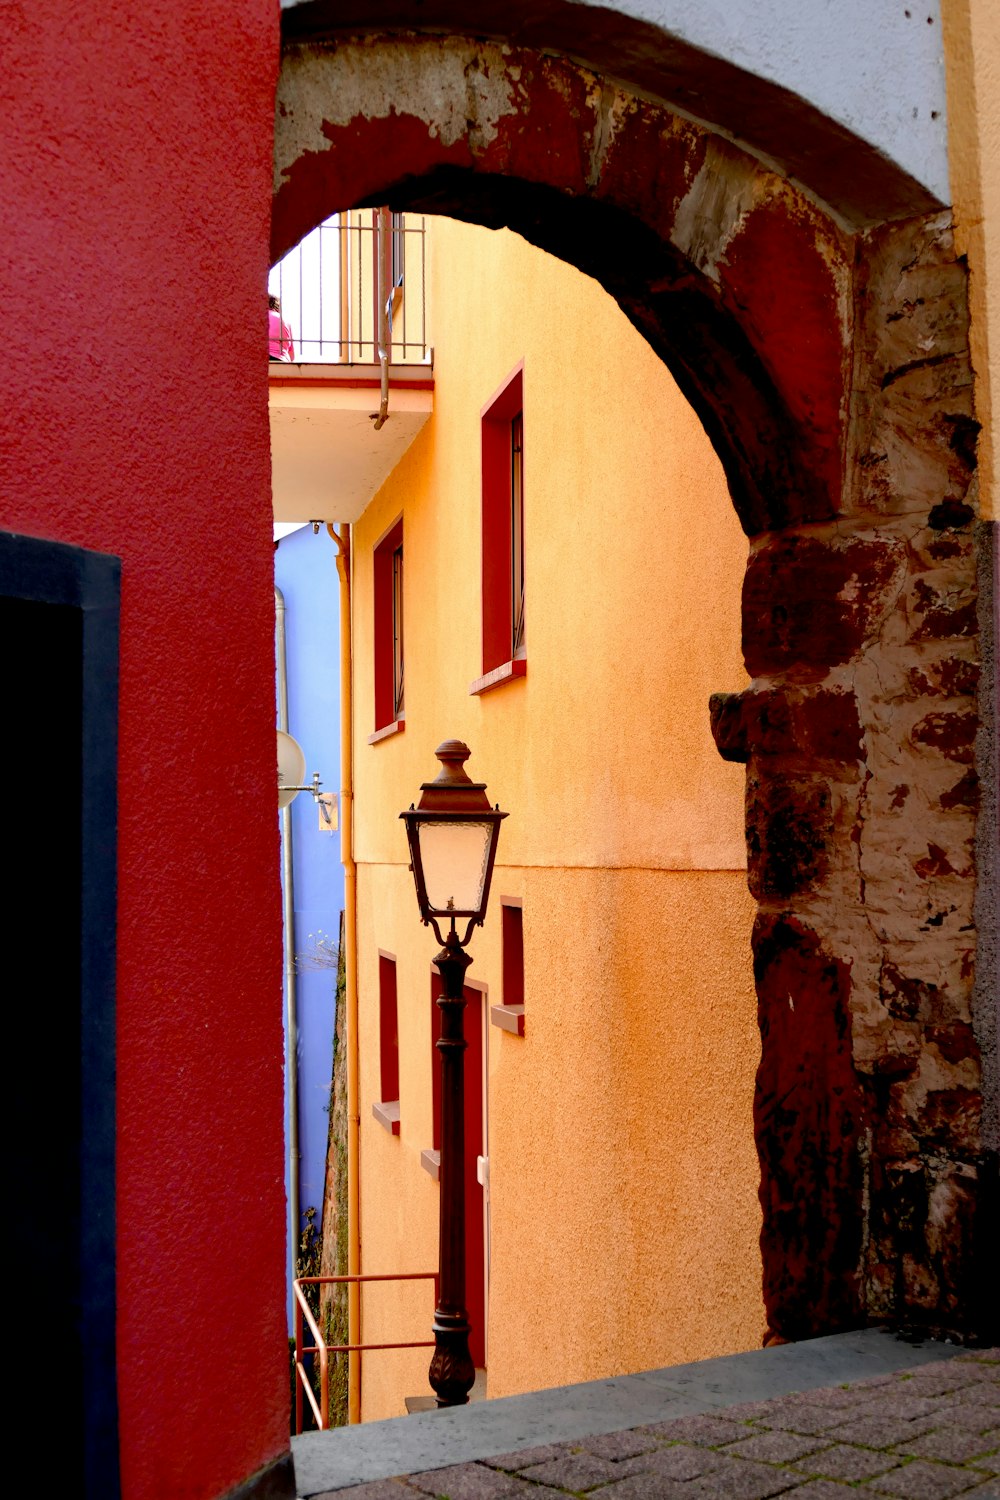 a narrow alley way with a lamp post and a red building